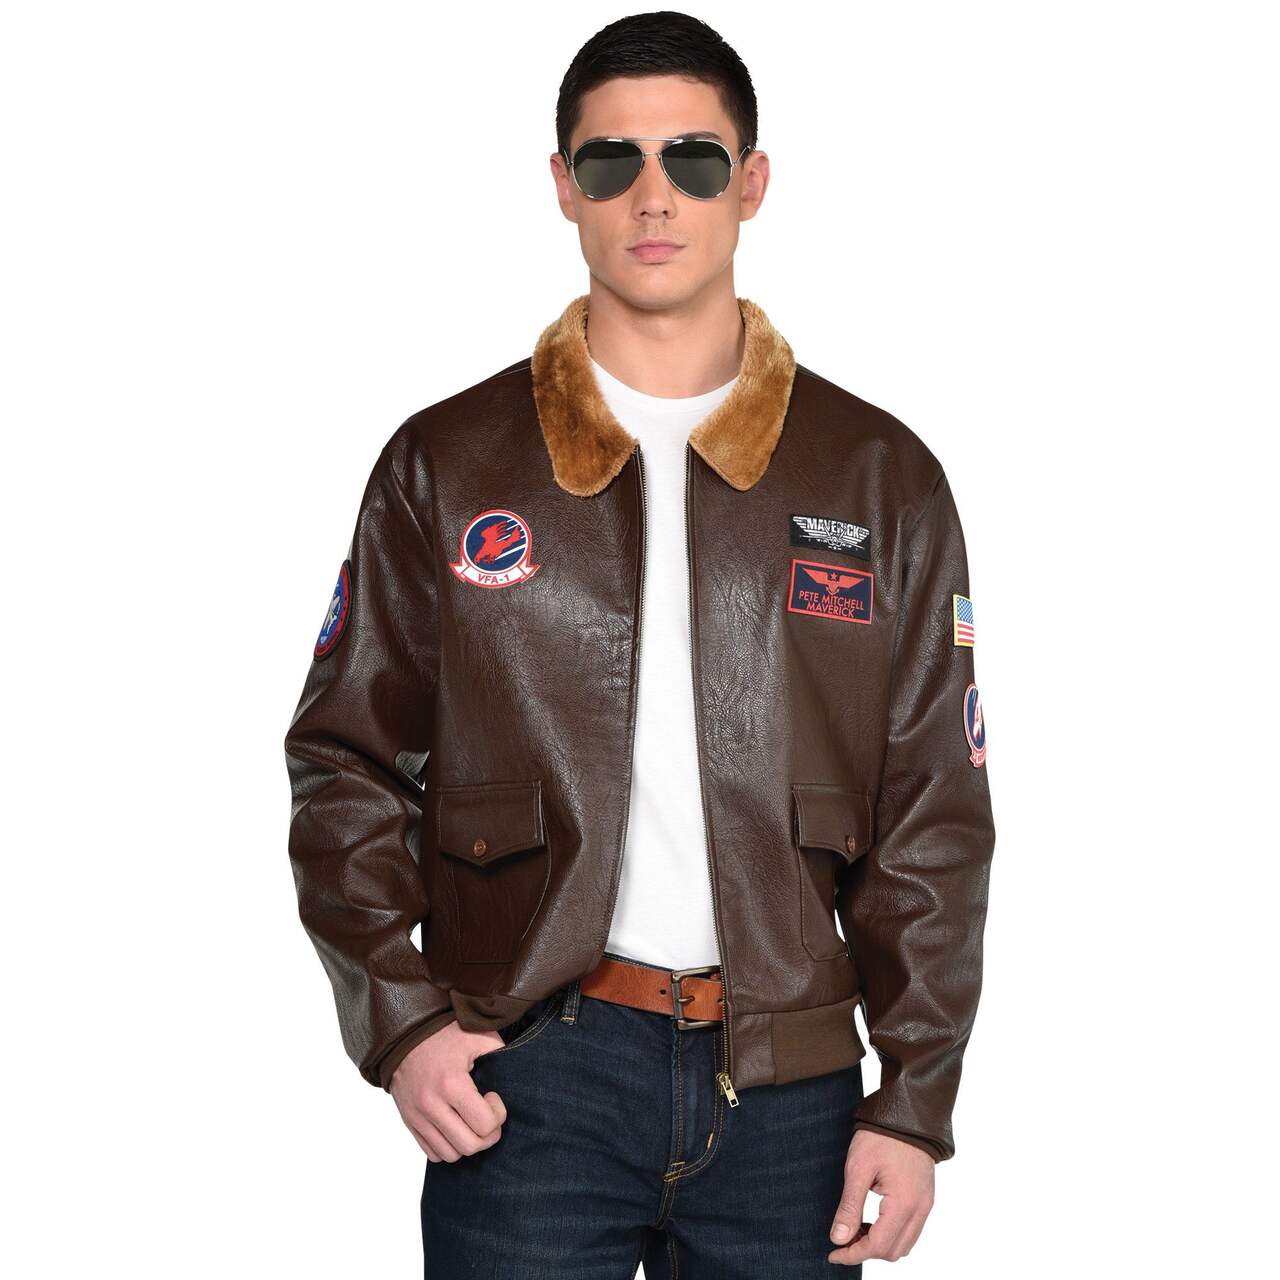 Adult Top Gun Maverick Fur-Trimmed Bomber Jacket, Brown, One Size, Wearable  Costume Accessory for Halloween